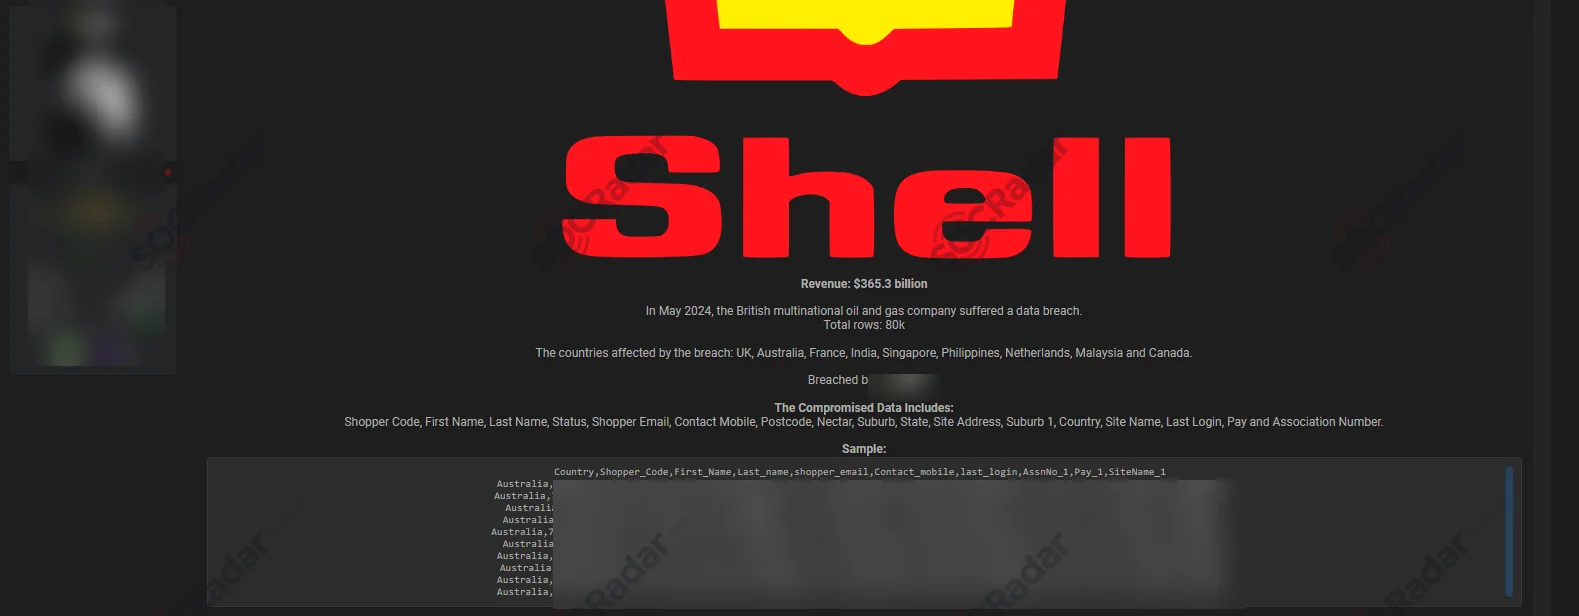 Shell Customer Database Allegedly Compromised, Leaked